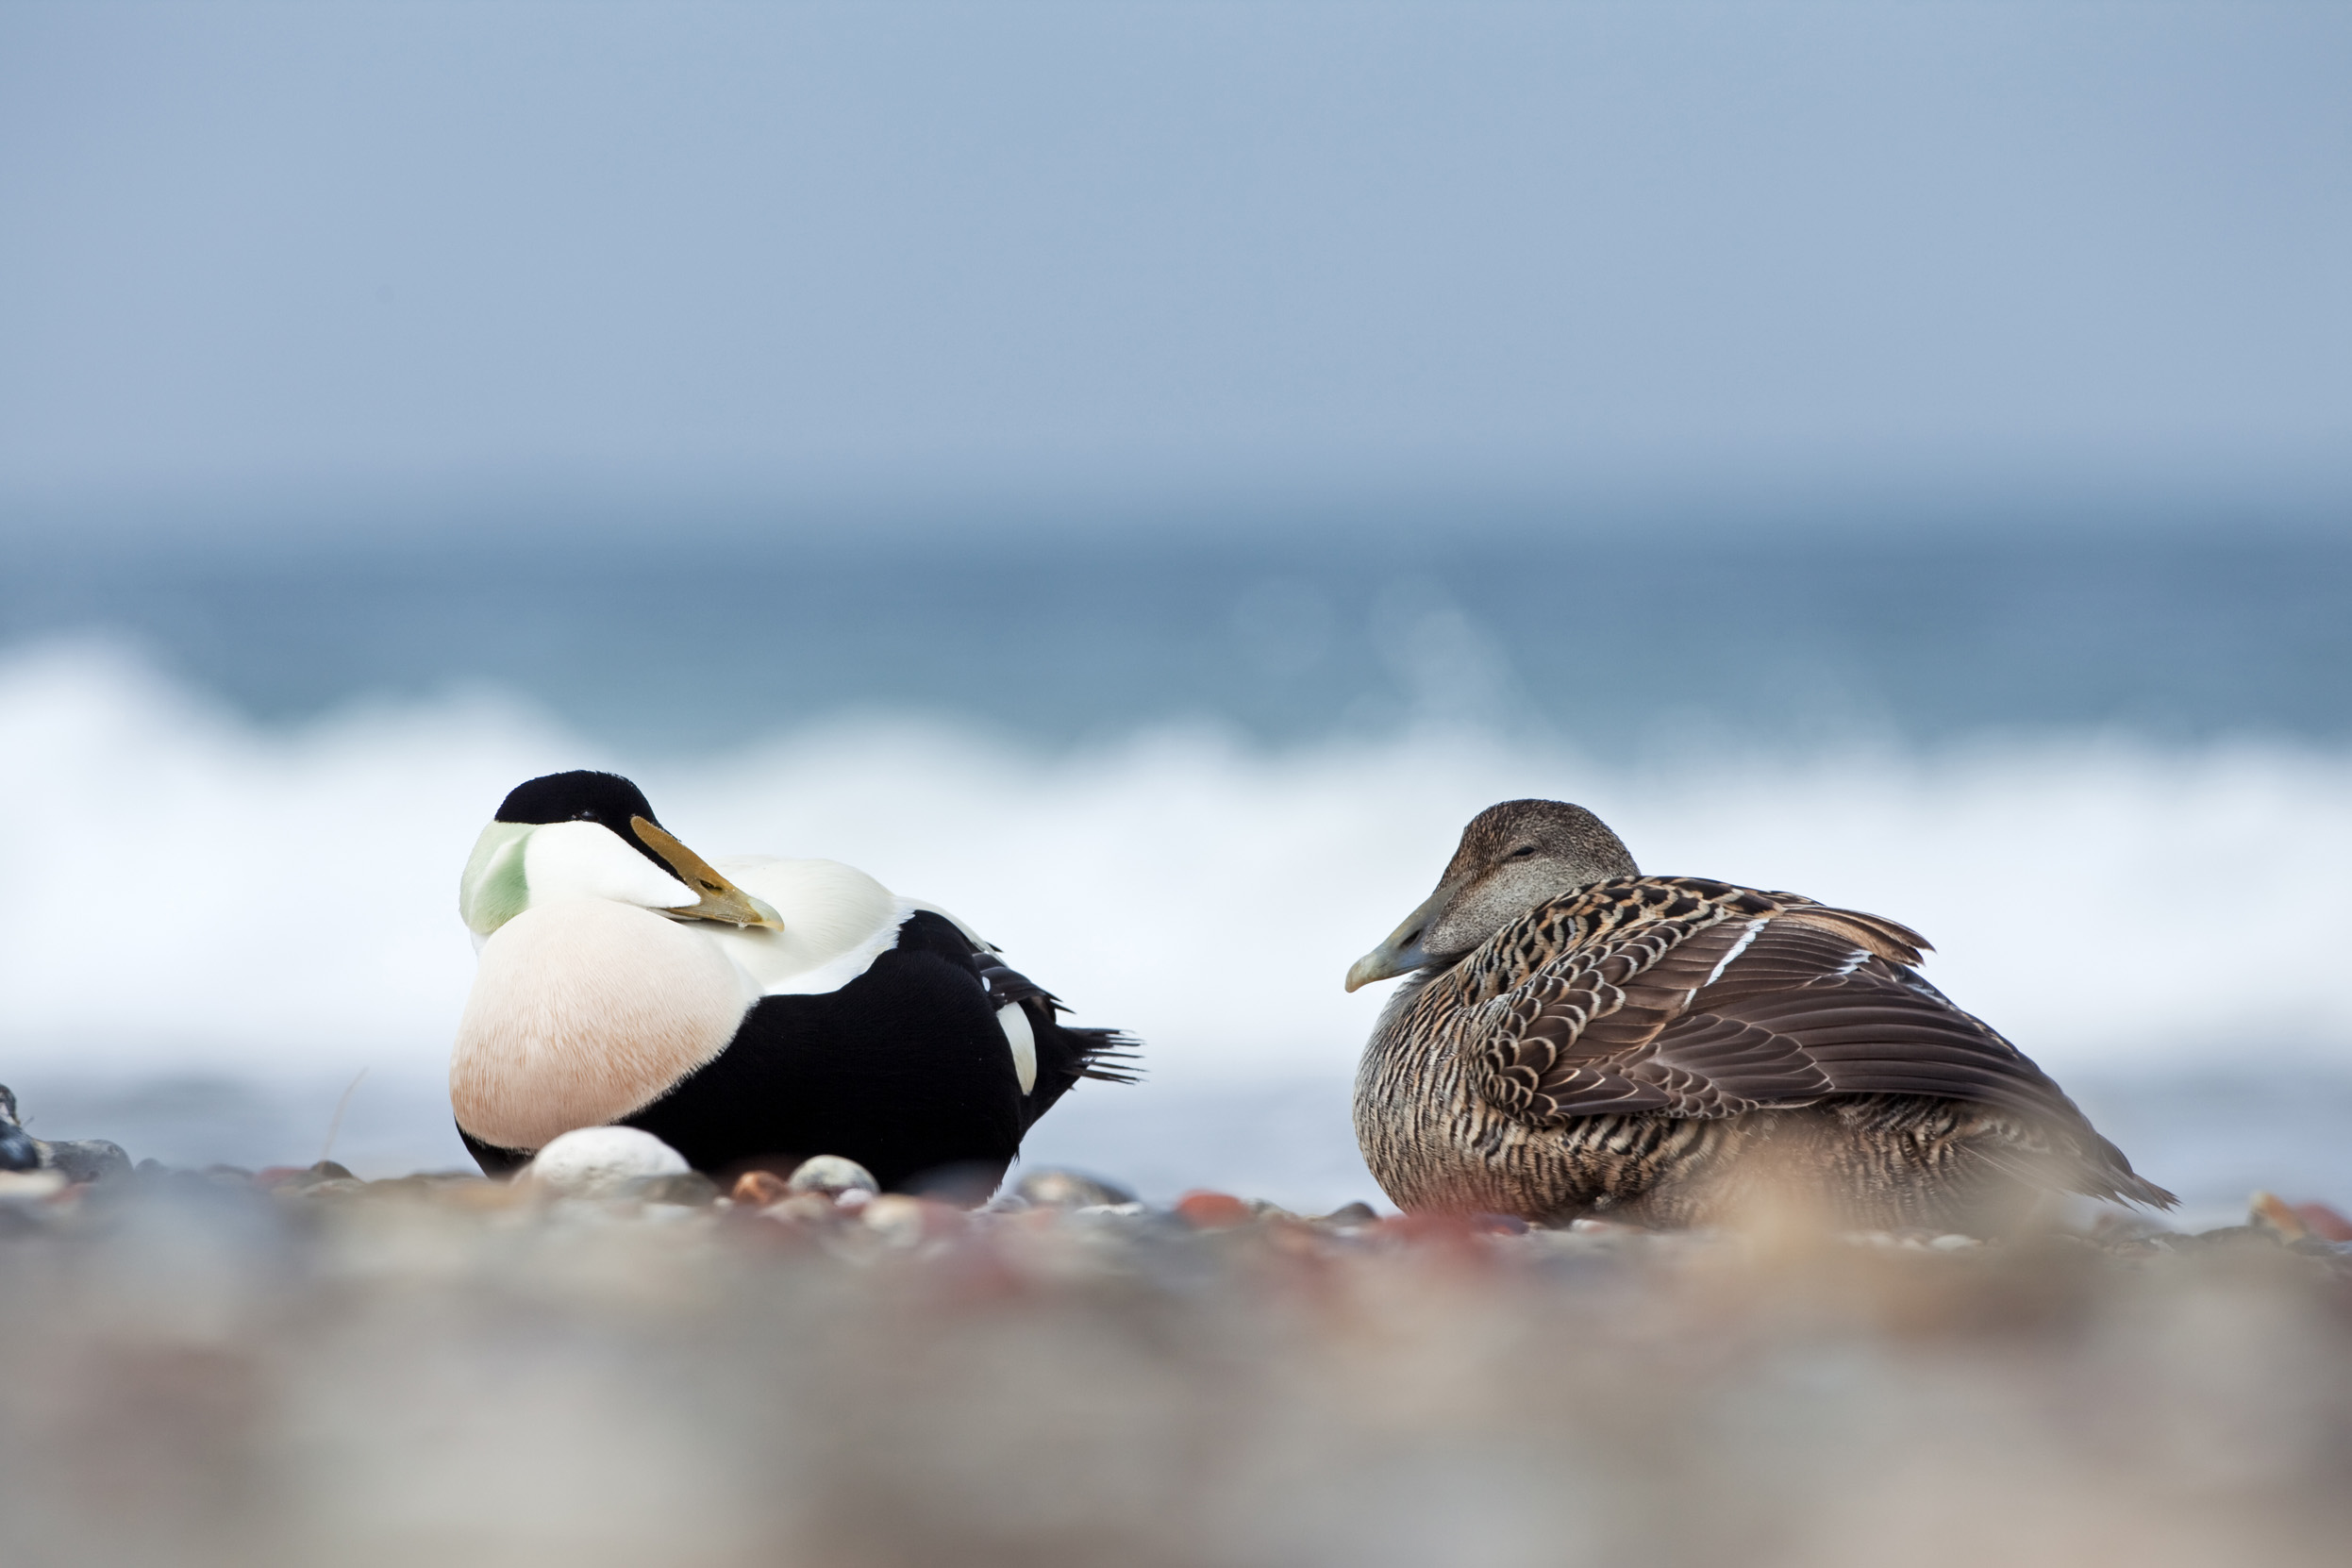 Male and female Eider sitting together on a rocky beach with waves crashing in the background.